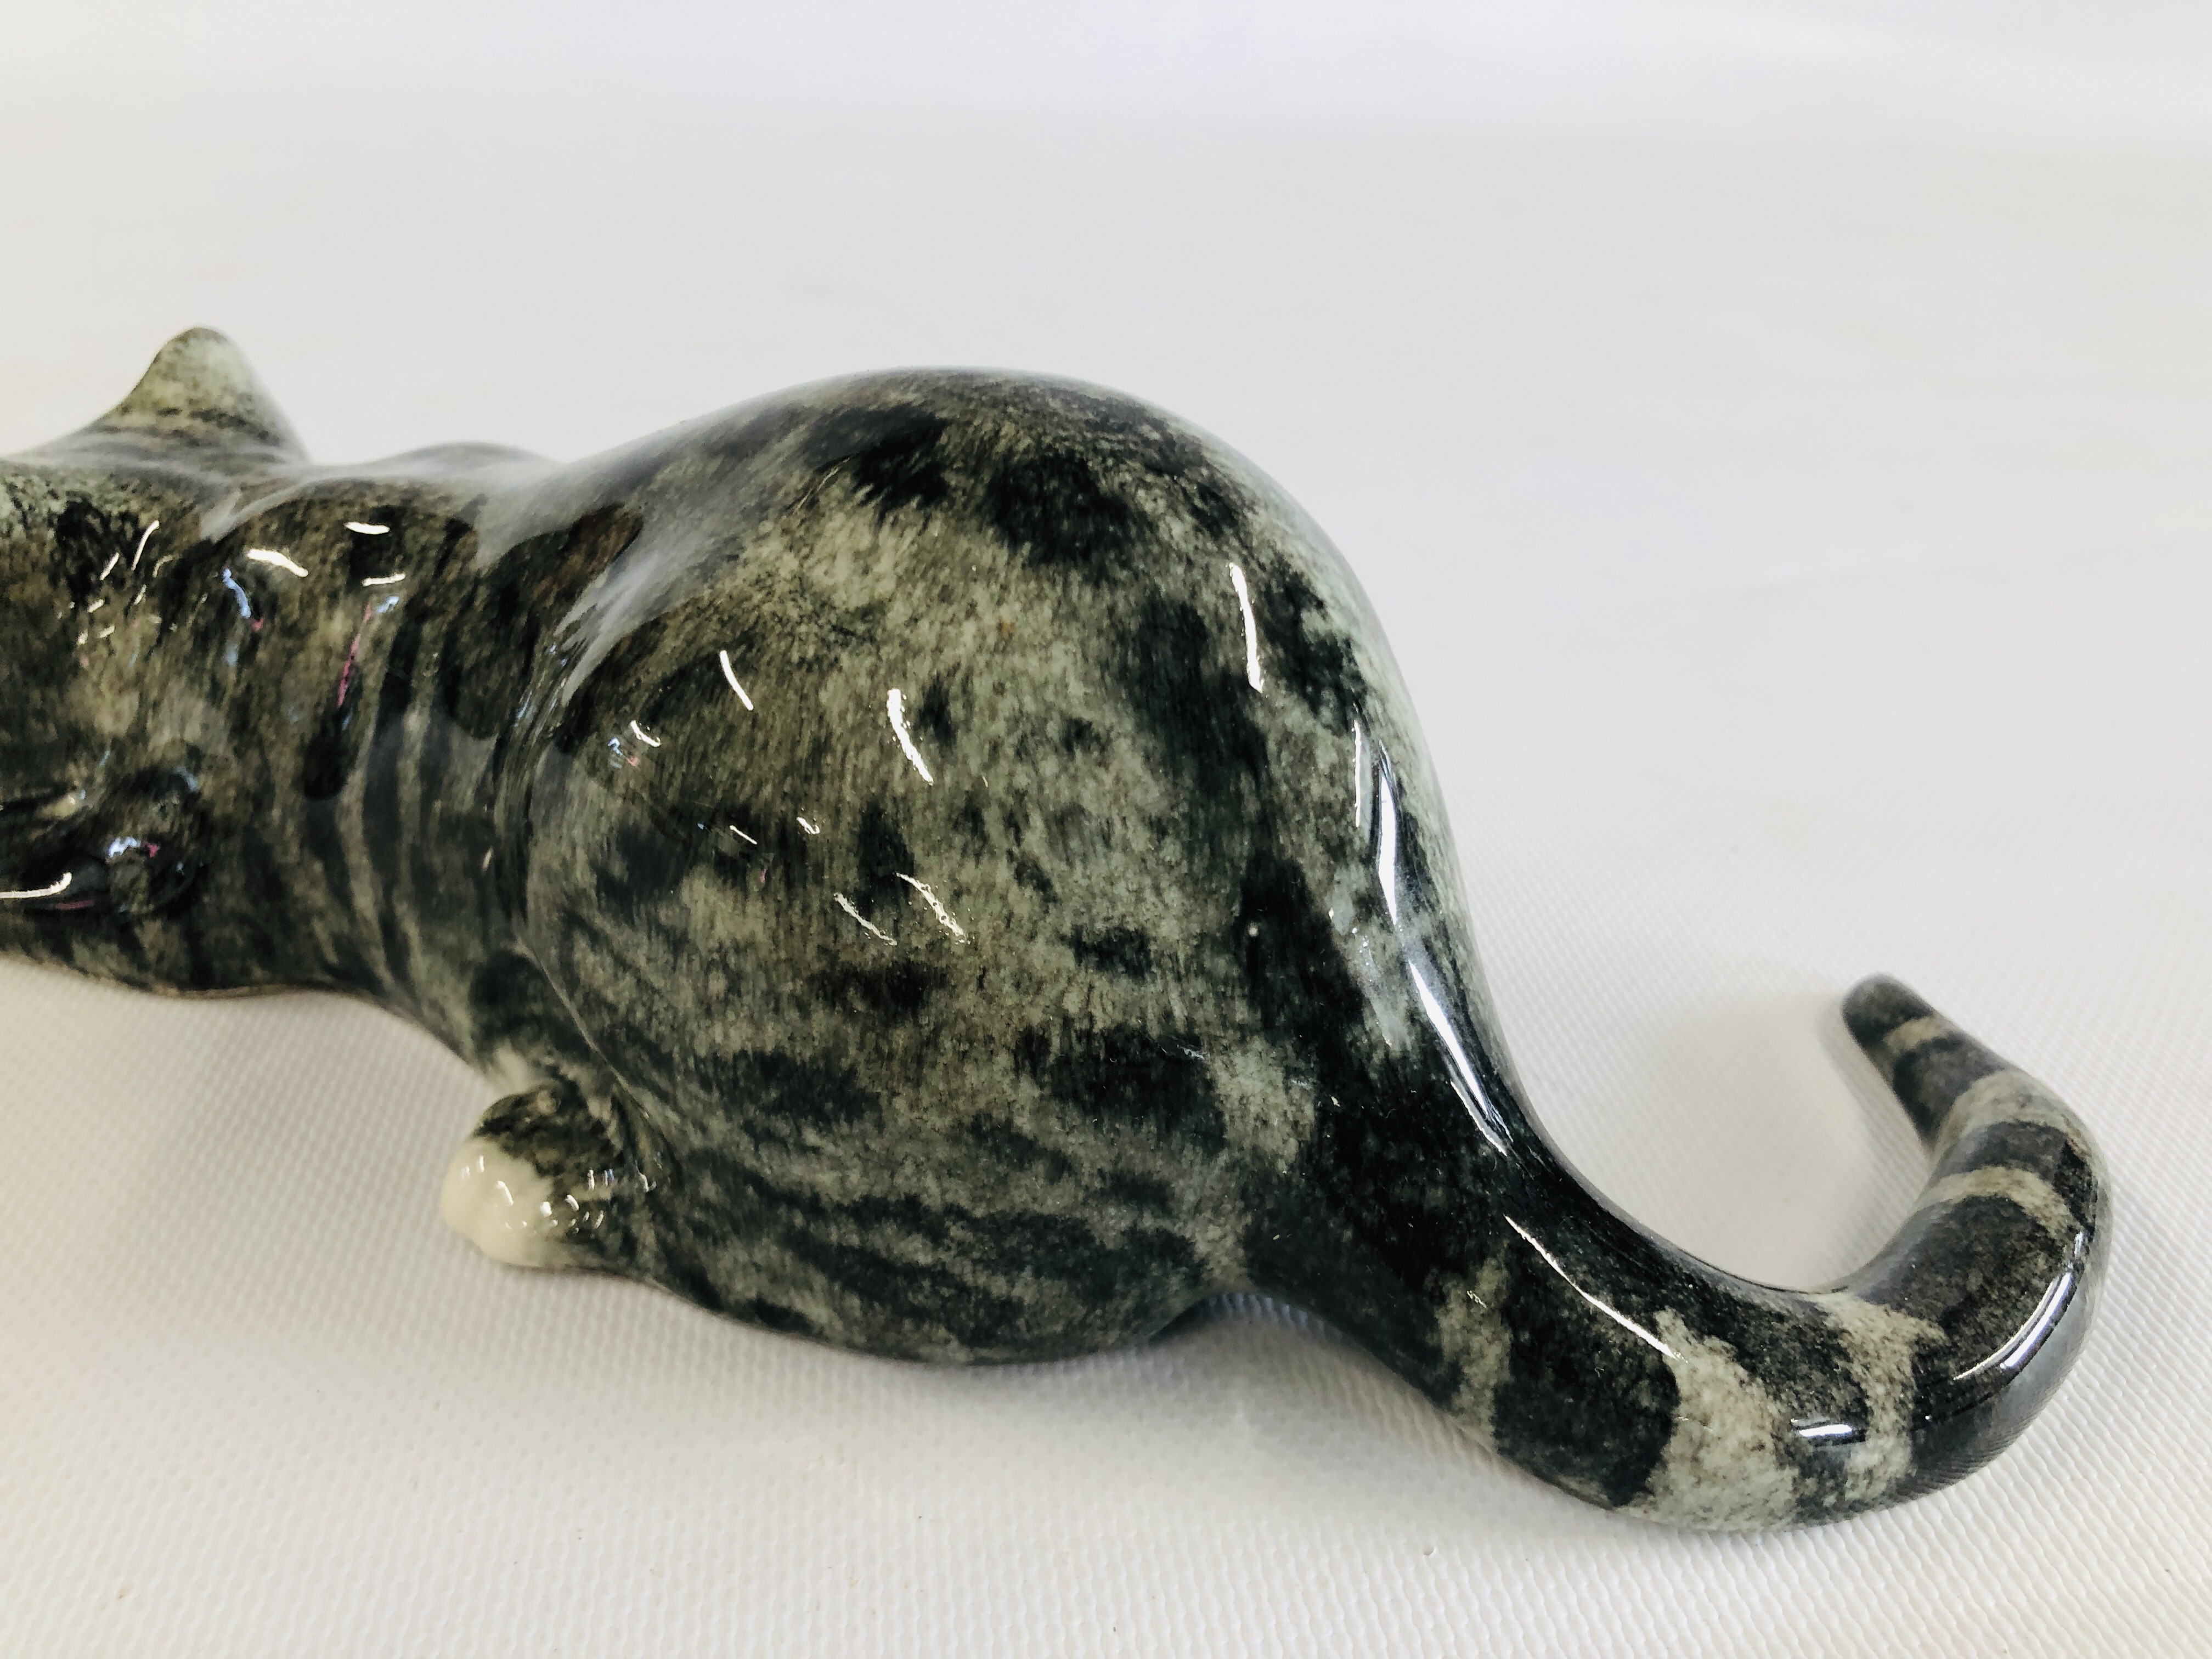 A POTTERY EXAMPLE OF A GREY CAT "READY TO PLAY" SIGNED TO THE BASE MIKE HINTON, H 8CM X L 26CM. - Image 4 of 7